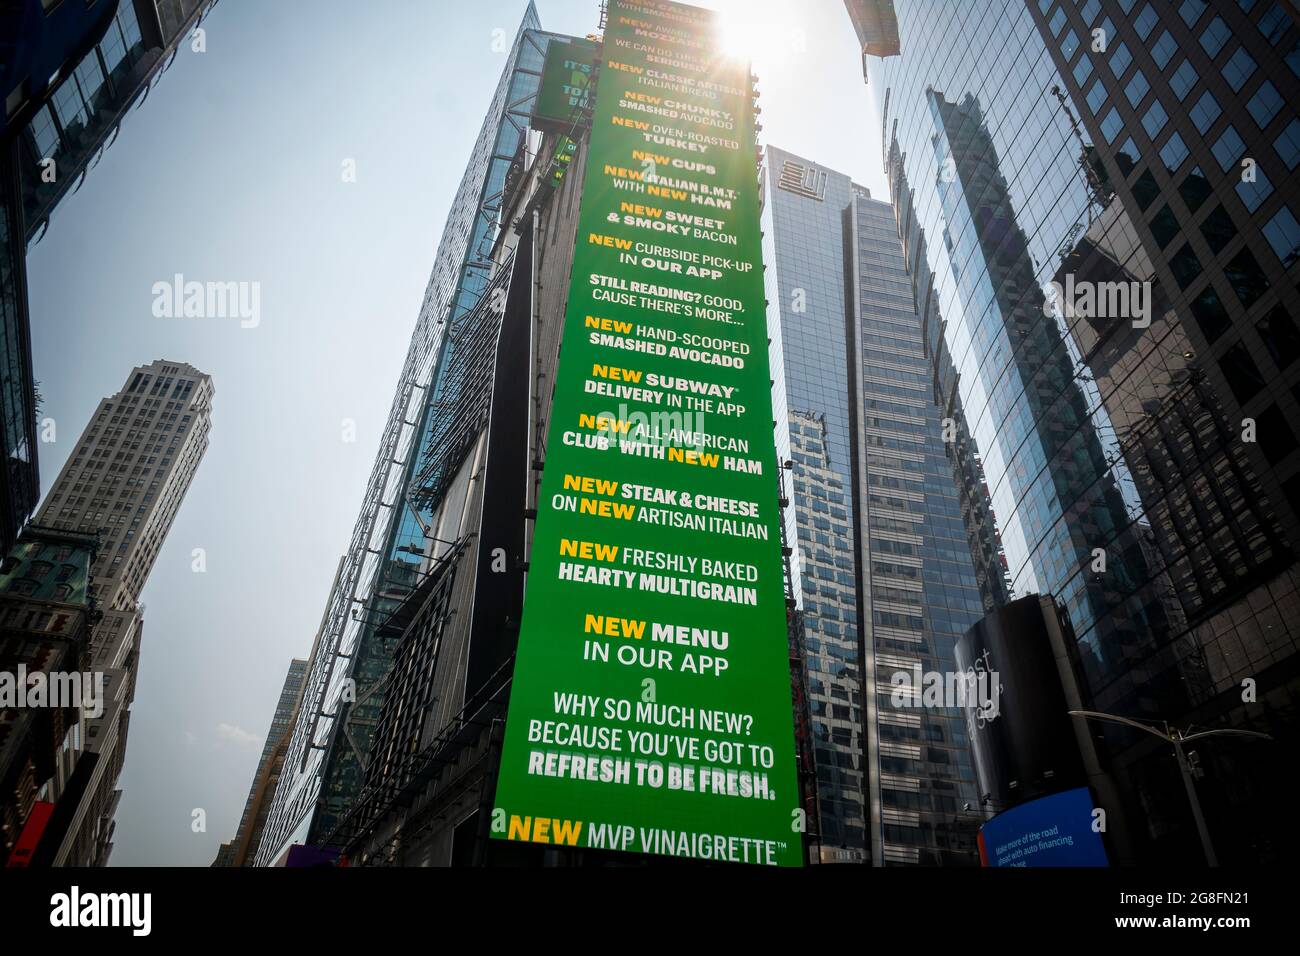 Advertising for the Subway sandwich chain in Times Square in New York on Thursday, July 15, 2021. Subway has revamped their menu in their “Eat Fresh Refresh” branding, updating their offerings. (© Richard B. Levine) Stock Photo